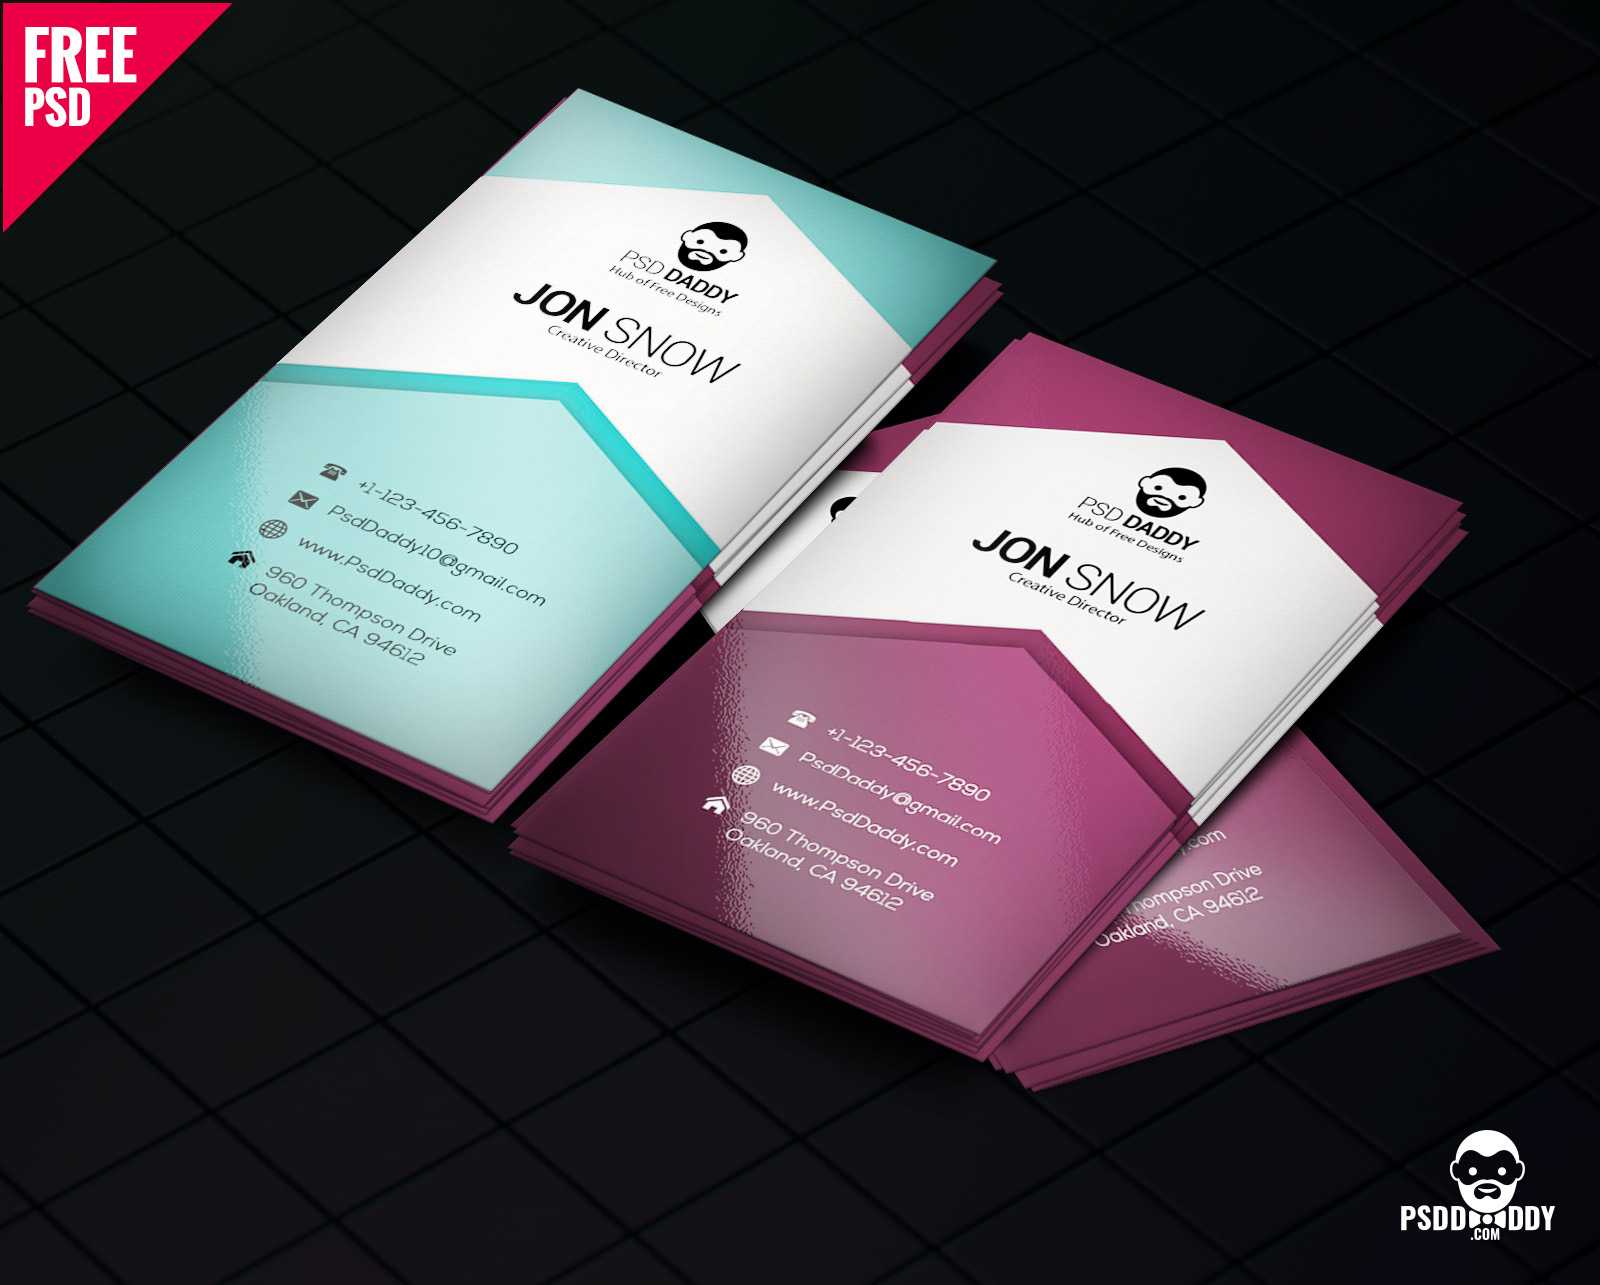 Download]Creative Business Card Psd Free | Psddaddy With Regard To Visiting Card Templates Psd Free Download